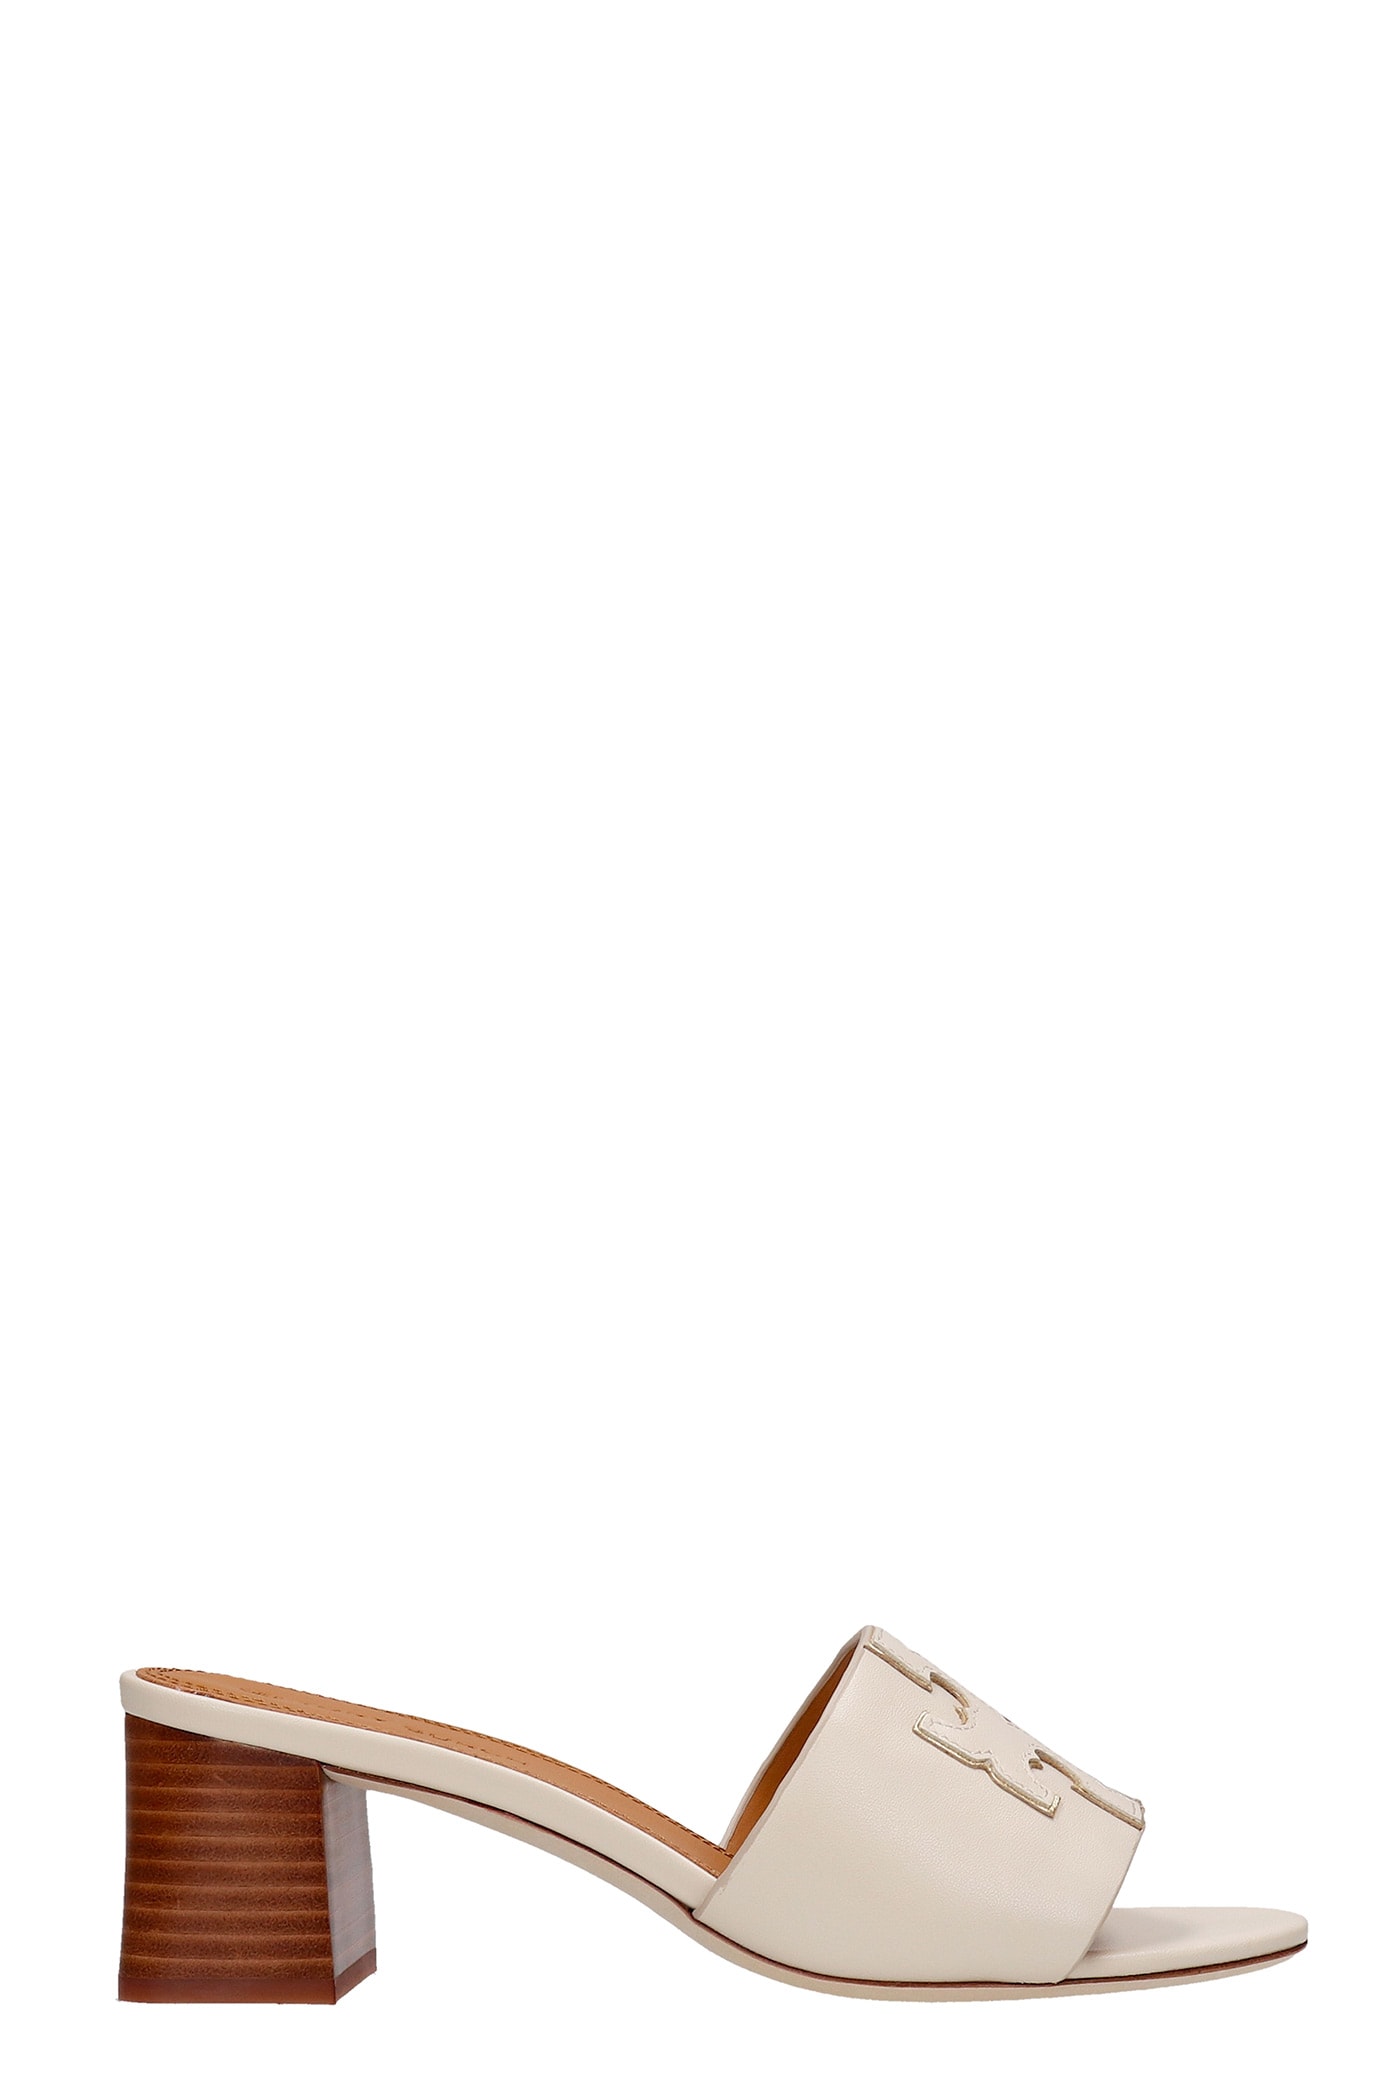 Tory Burch Ines Sandals In Beige Leather